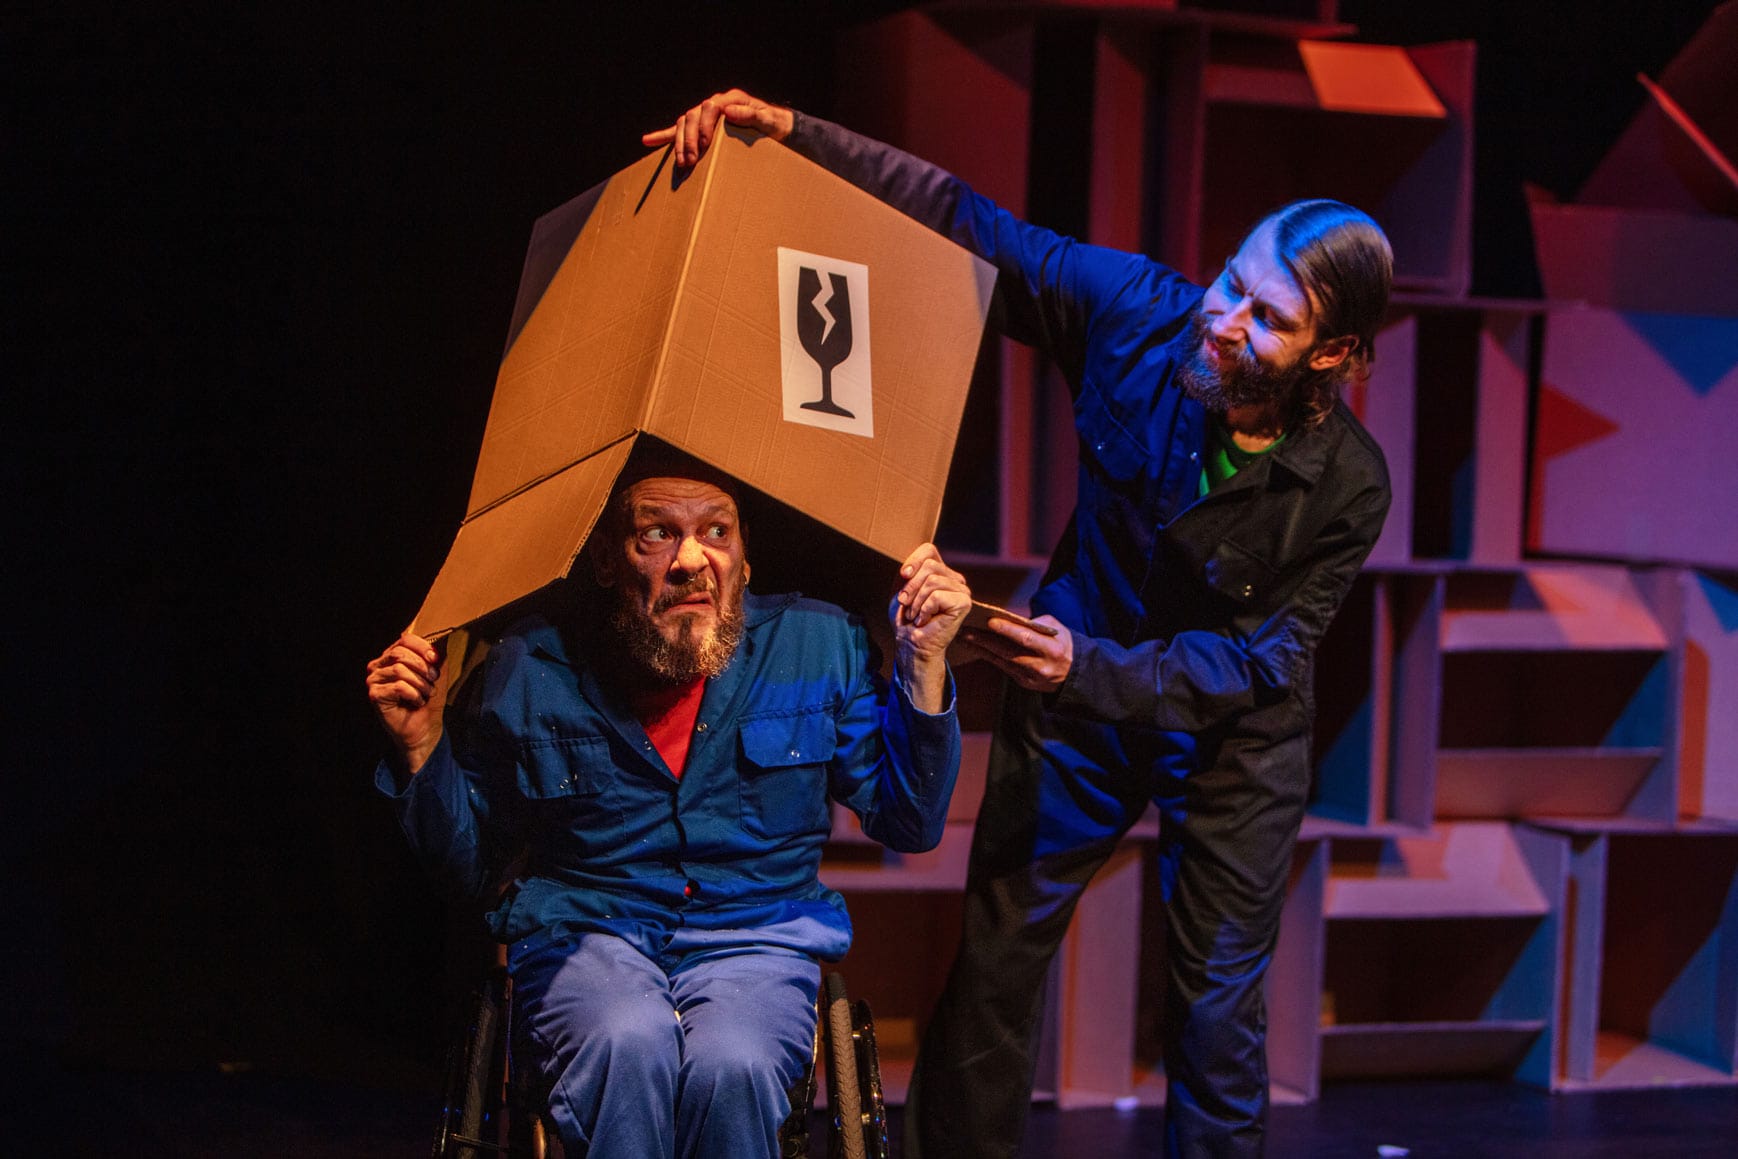 Daryl, a white man with a beard in light blue overalls, is sat in his wheelchair peering out from a cardboard box on his head. Jon, a white person with a beard wearing dark blue overalls is lifting the box of Daryl’s head. In the background is a wall of cardboard boxes